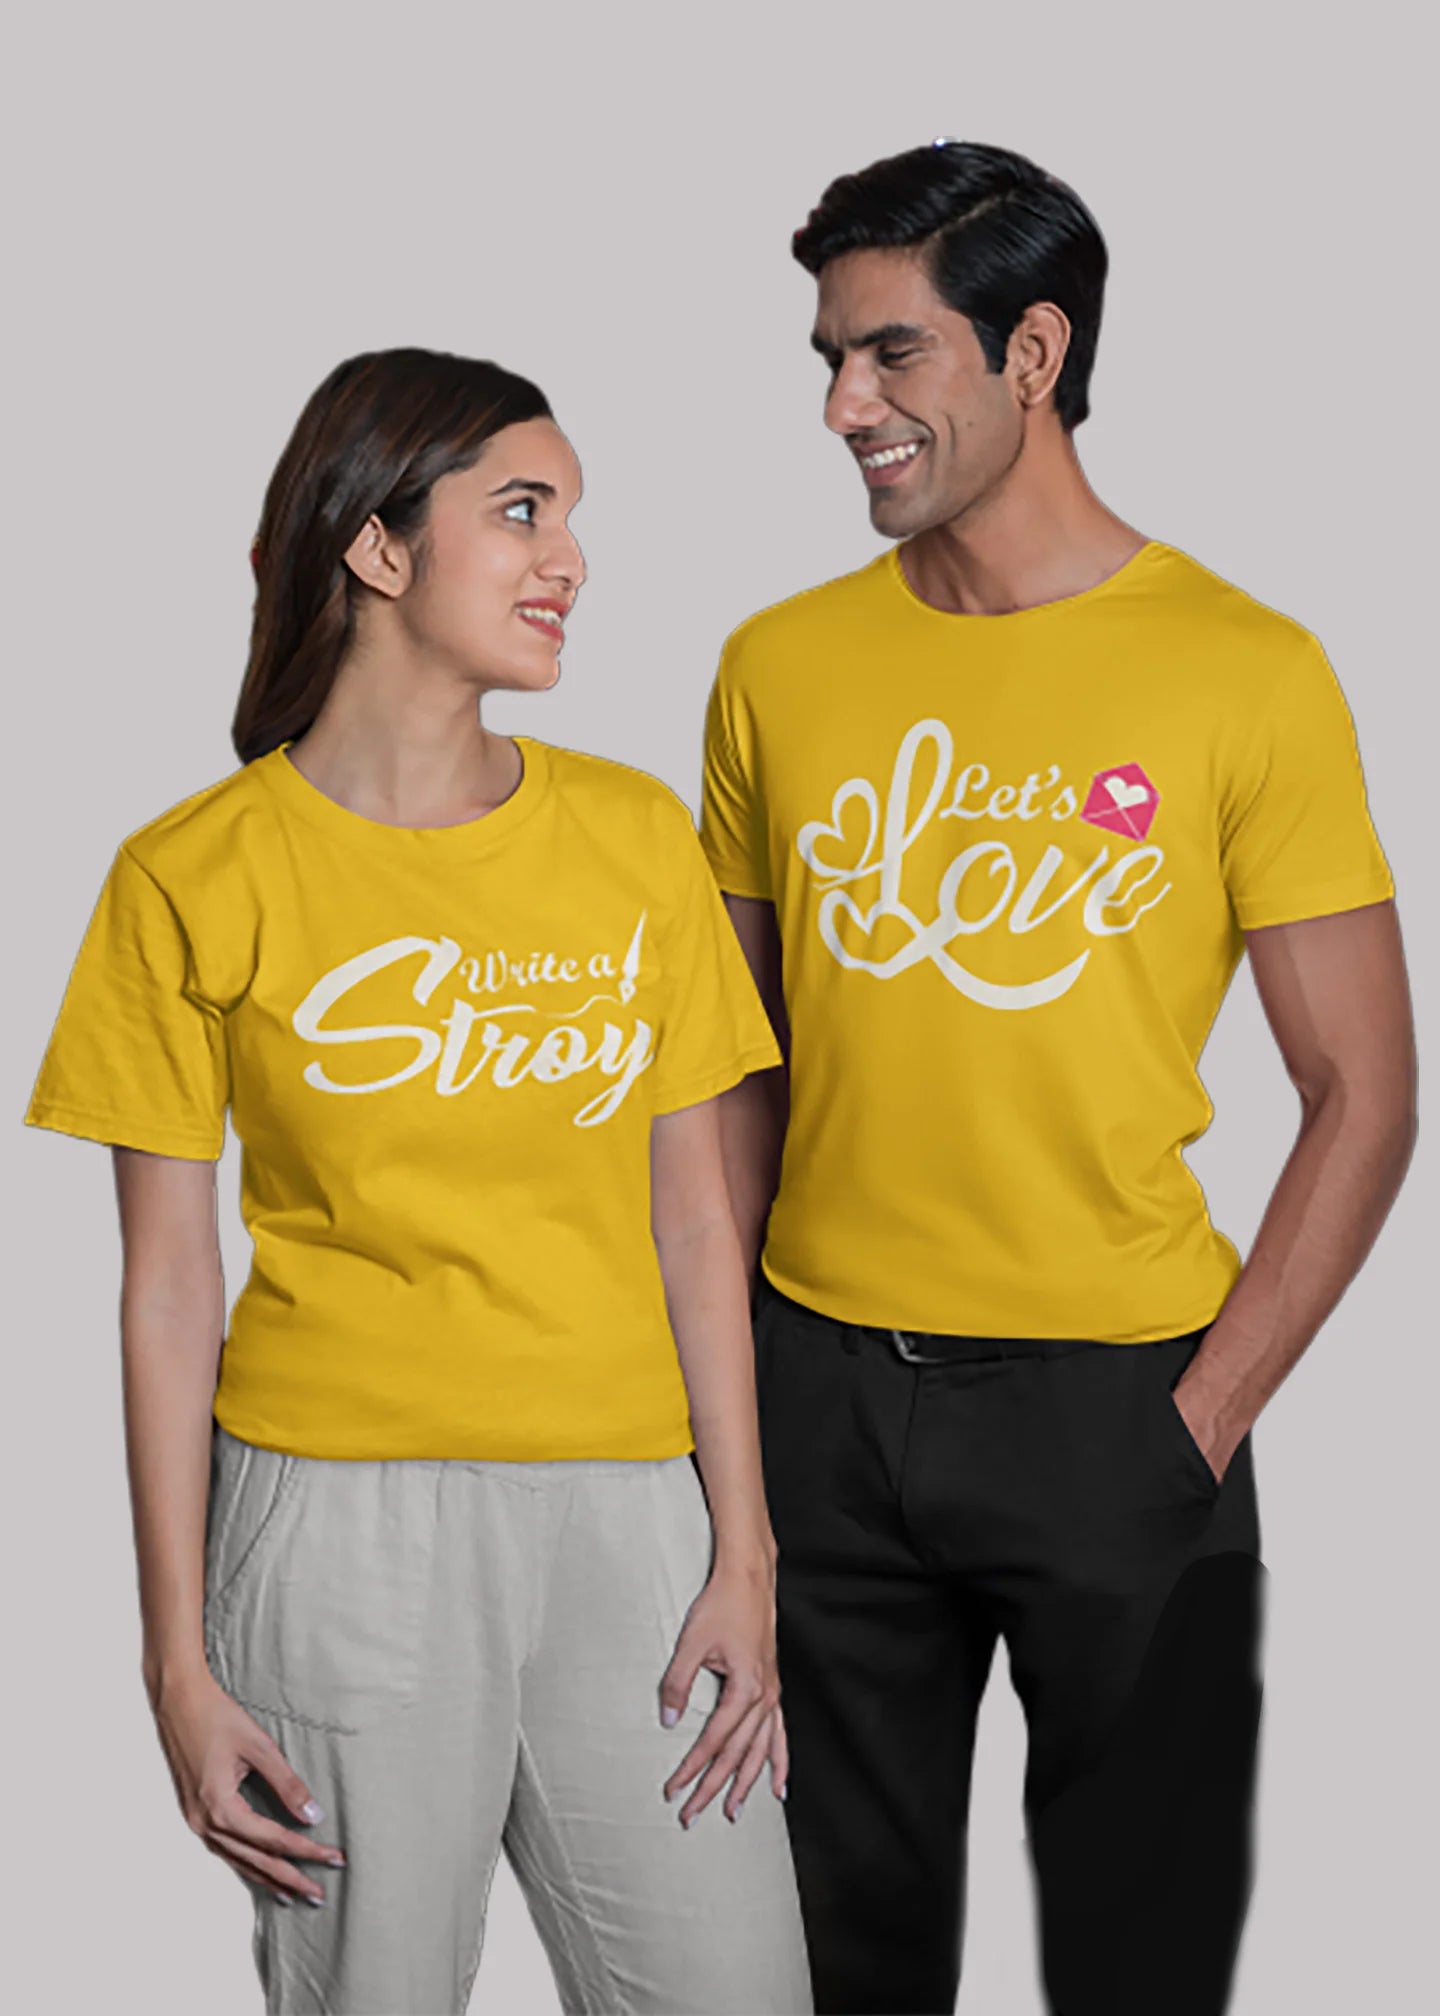 Lets love write a story Printed Couple T-shirt